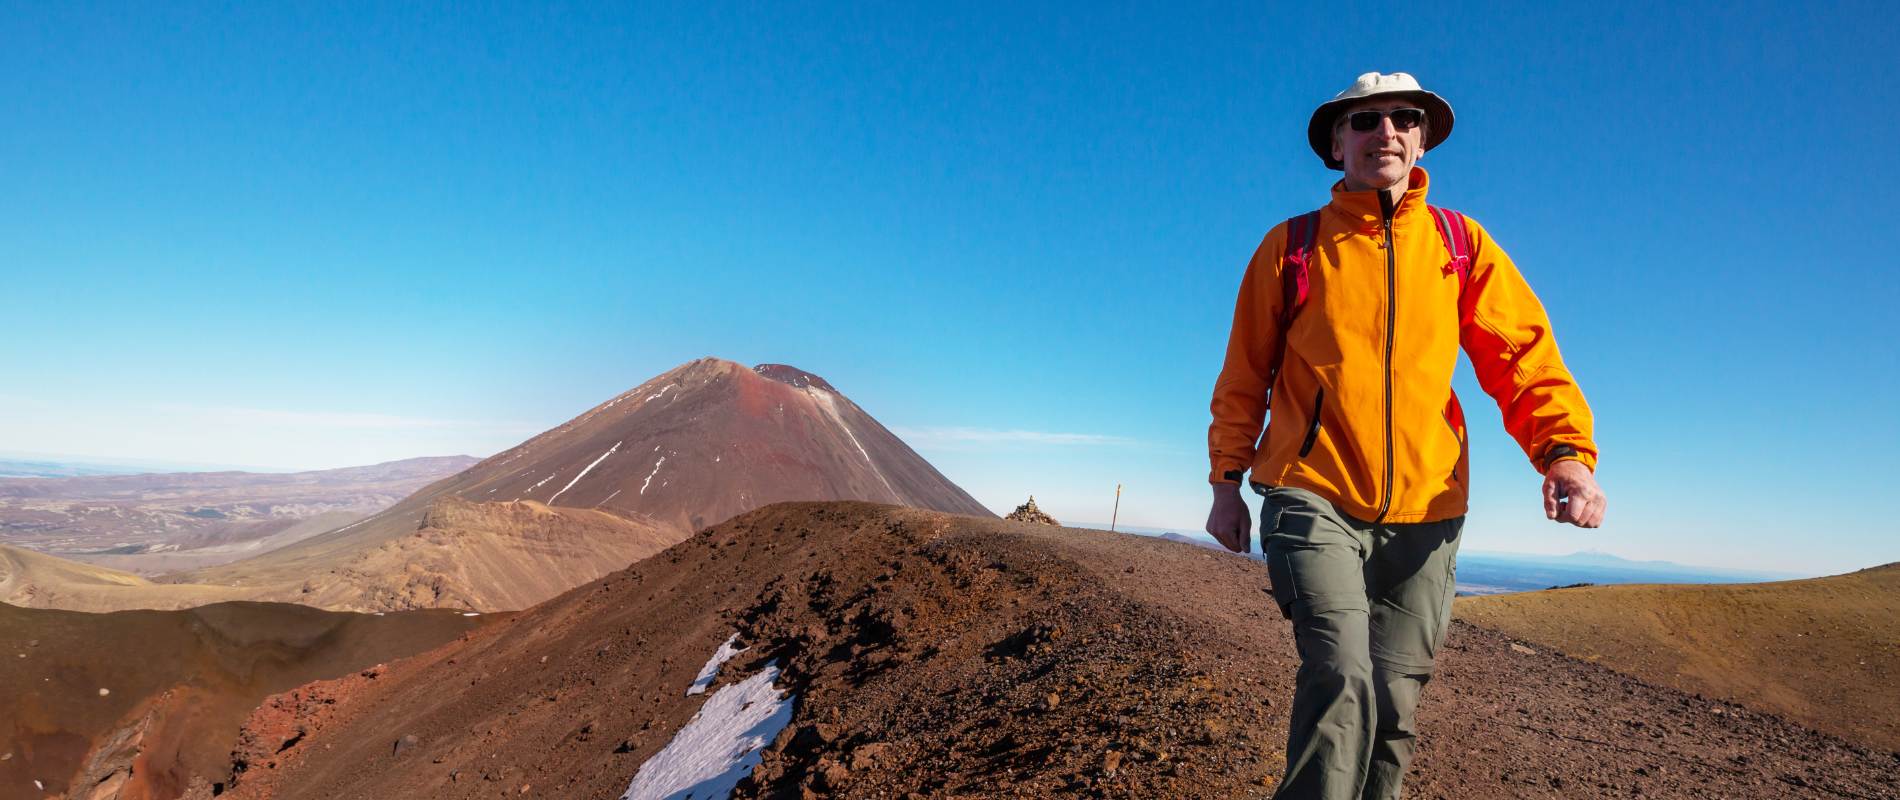 A Day of Adventure: Conquering The Tongariro Crossing